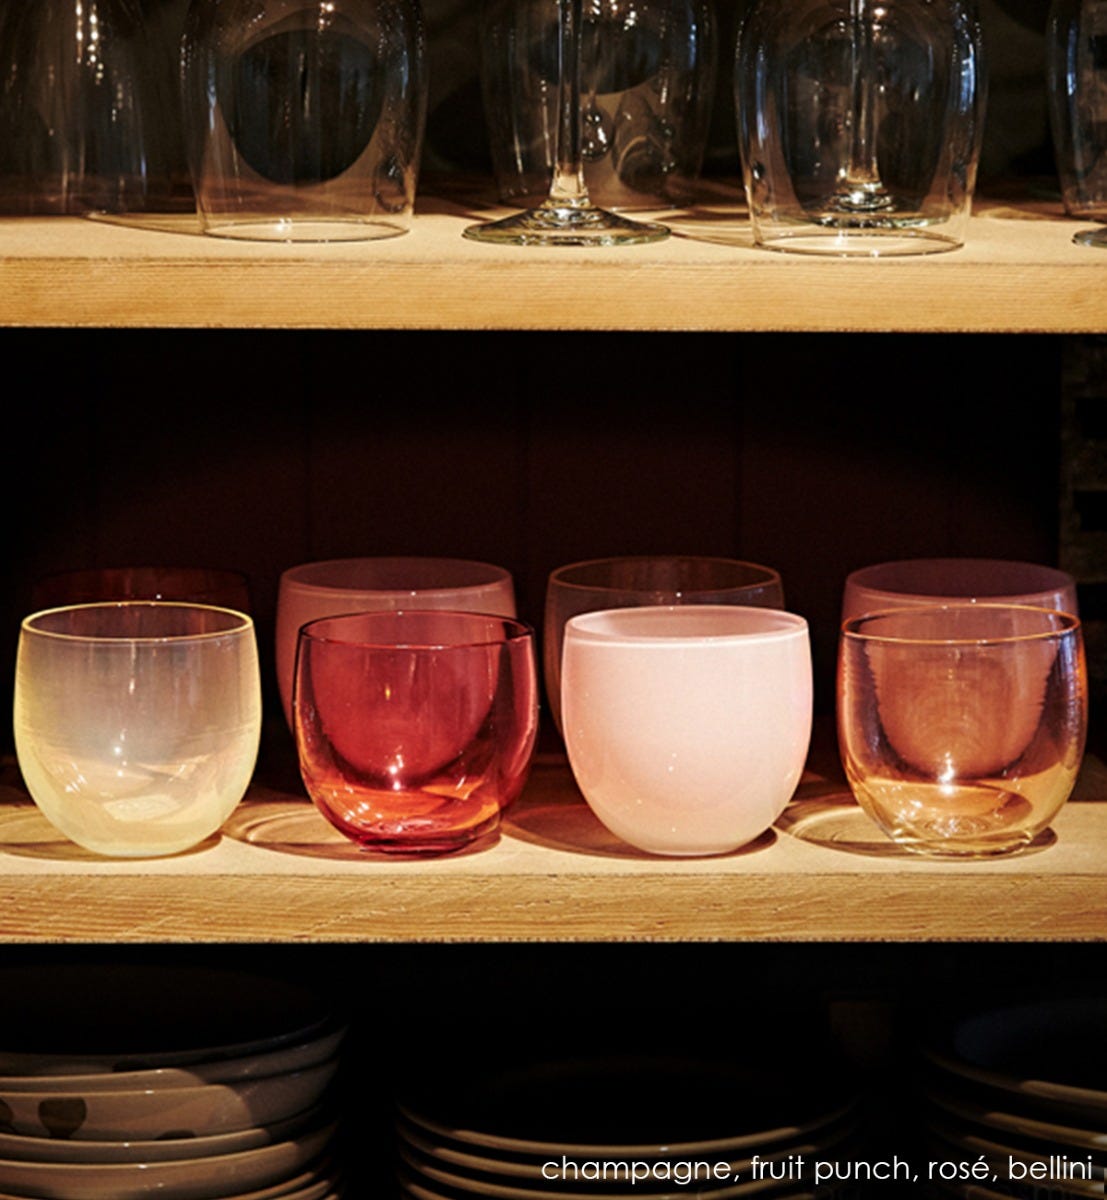 rose drinker, soft pink hand-blown drinking glass. Paired with champagne, fruit punch, and bellini.